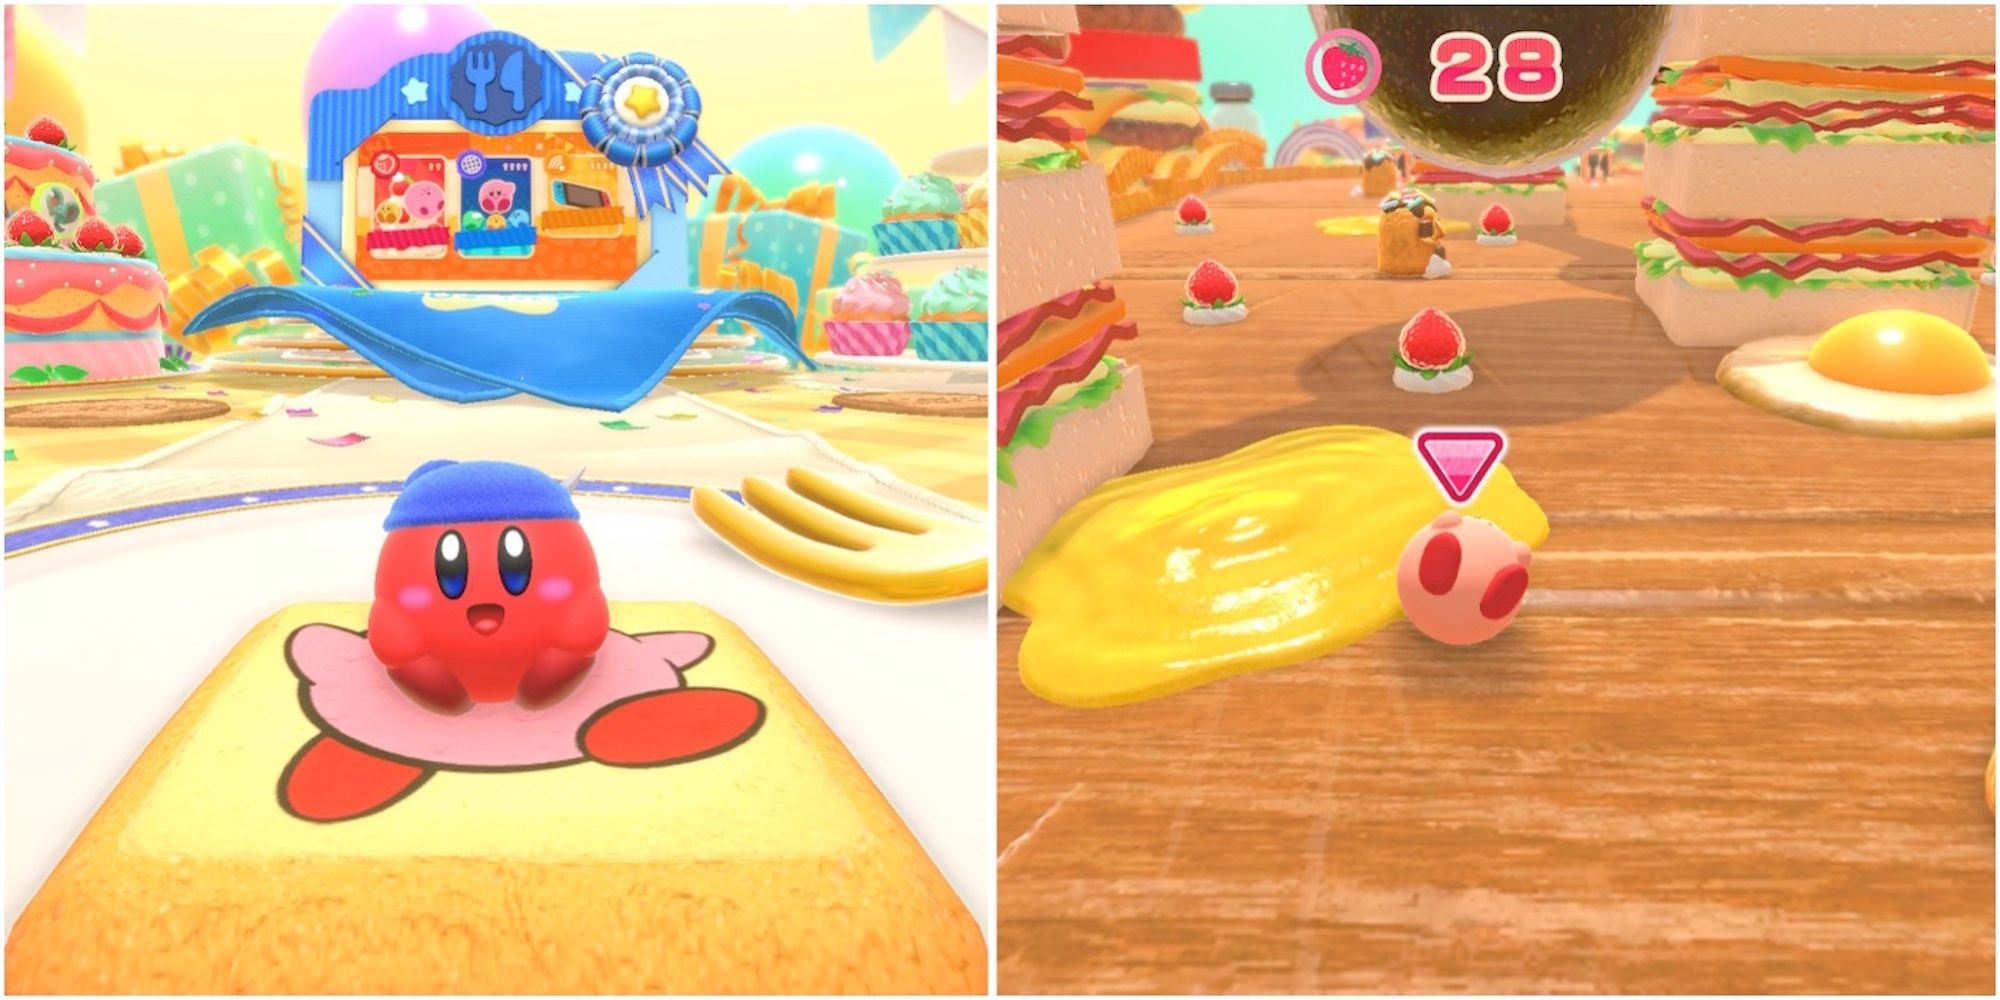 Kirby and playing a race in Kirby's Dream Buffet